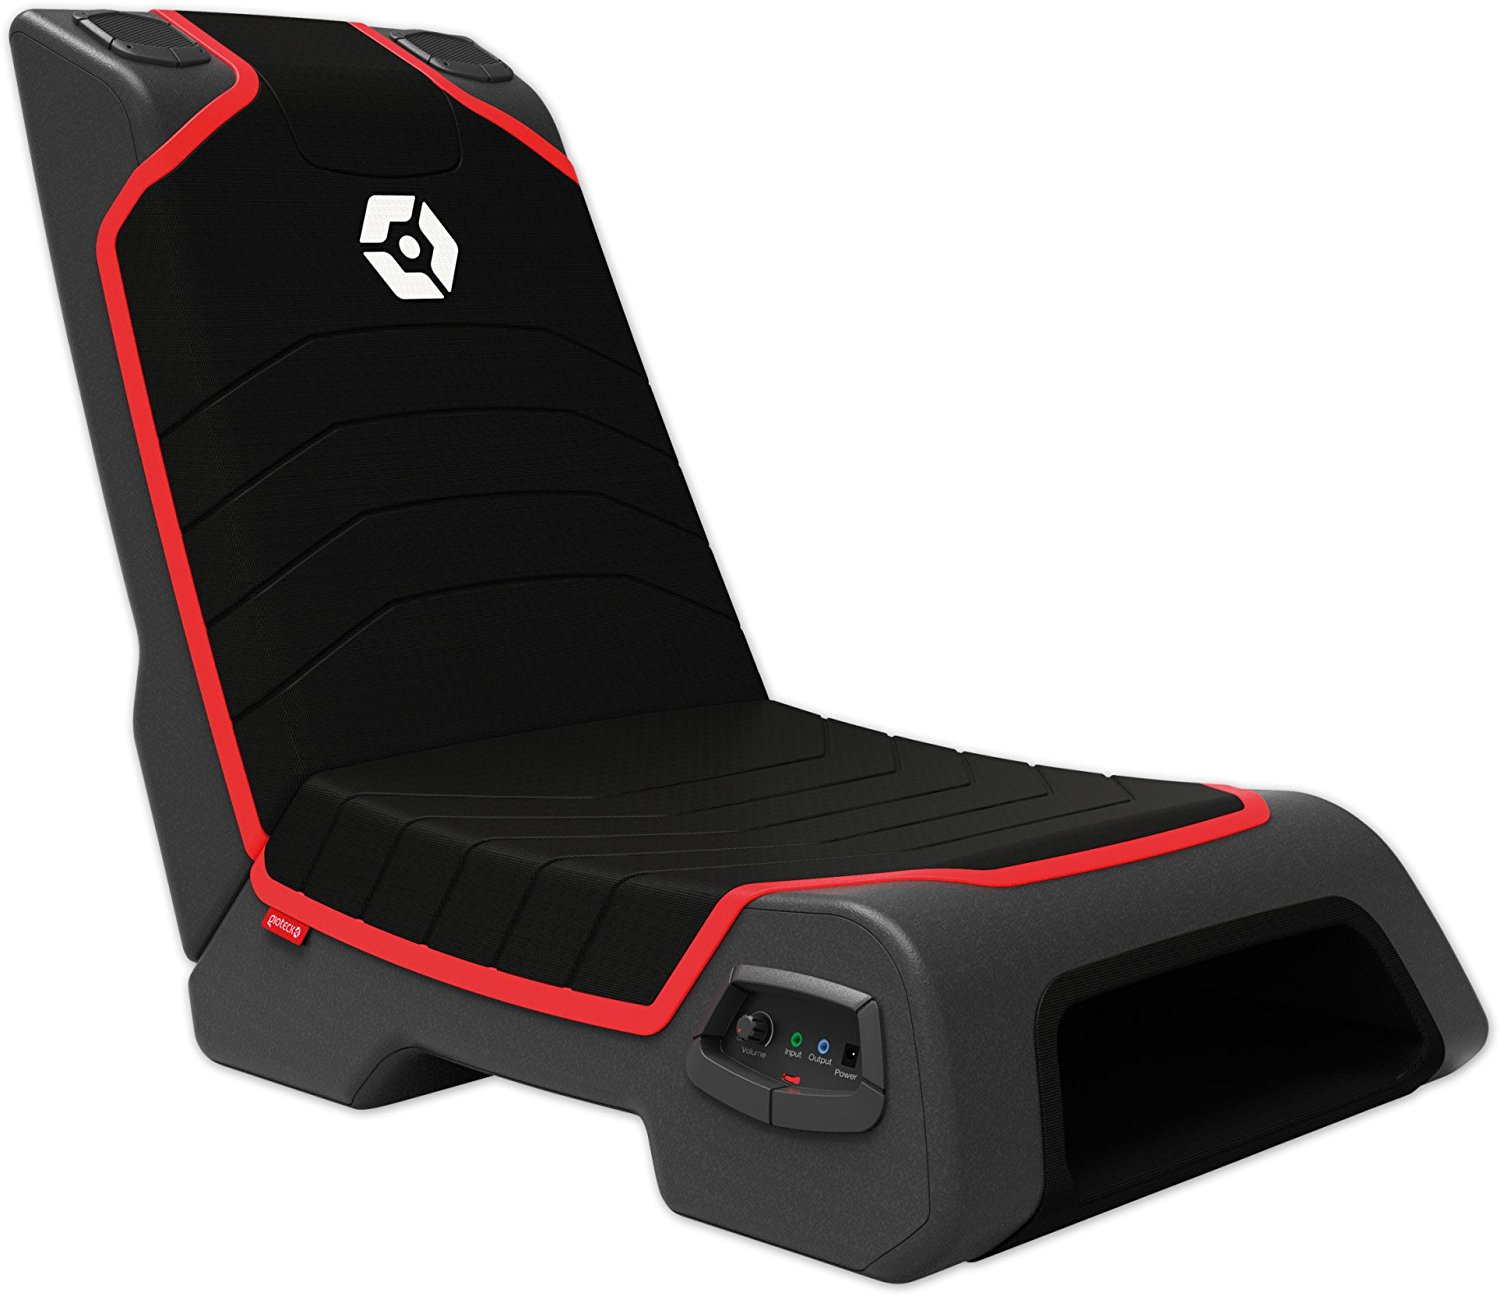 xbox one gaming chair